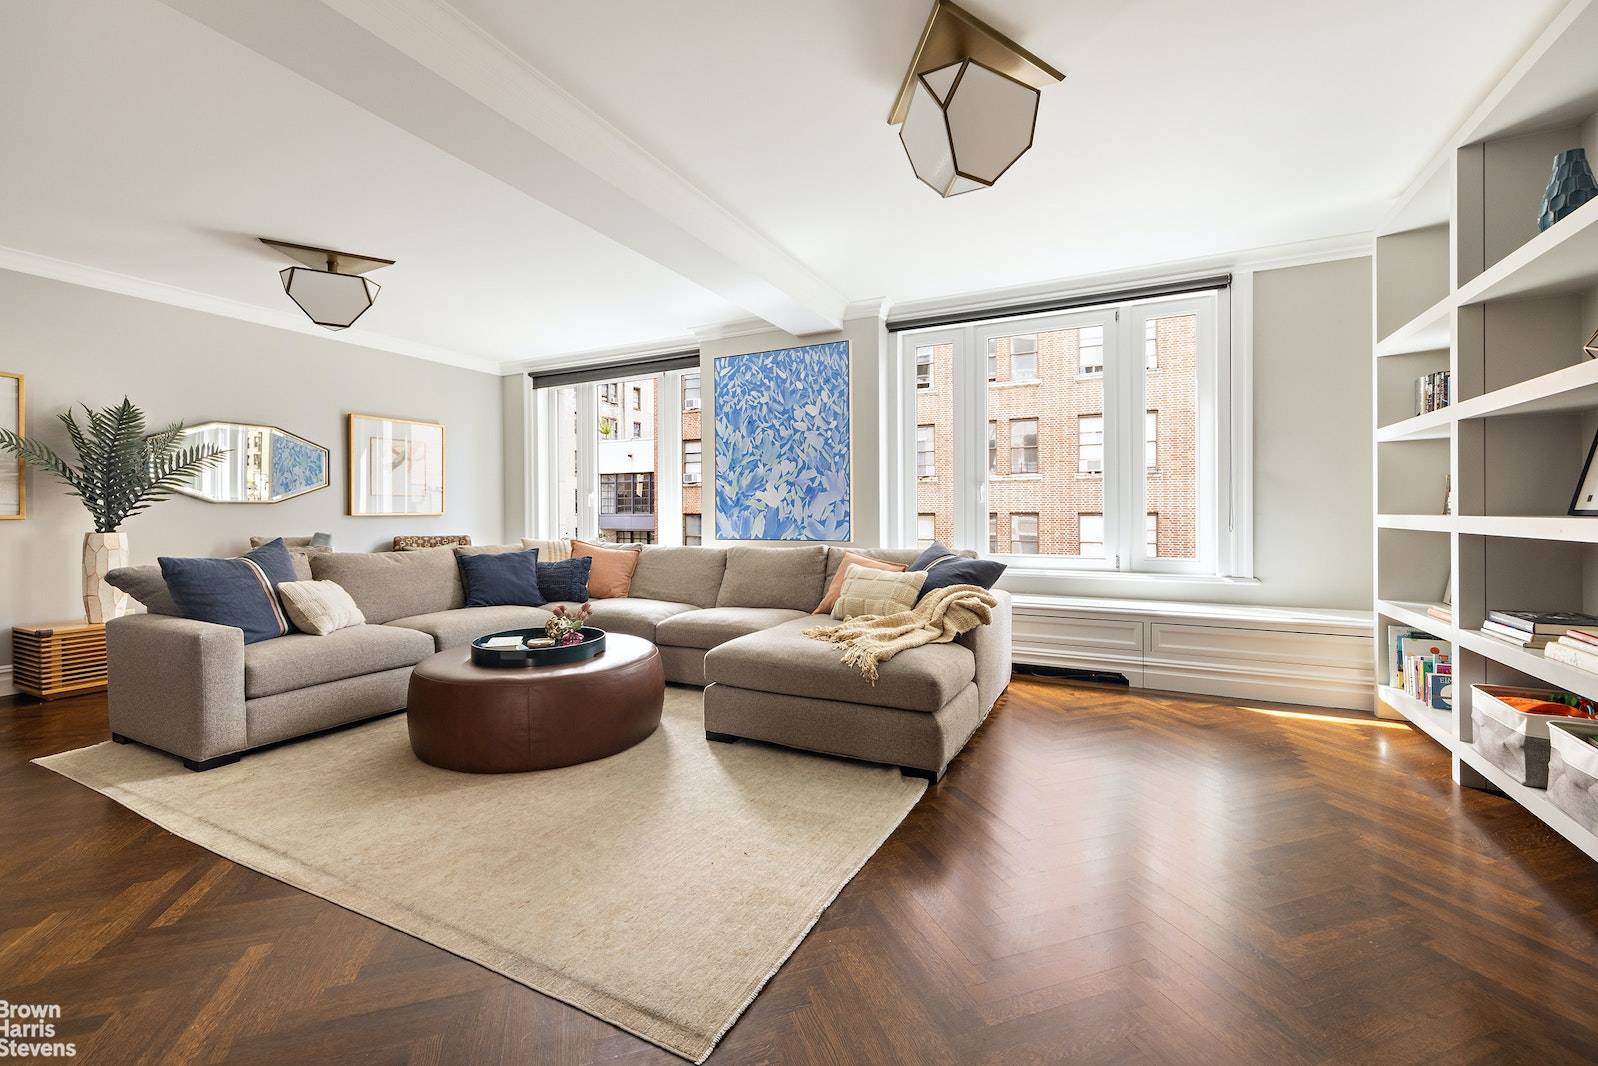 Back on the market ! Discover this meticulous and classic prewar convertible 5 bedroom condominium residence a harmonious blend of contemporary convenience and timeless charm.